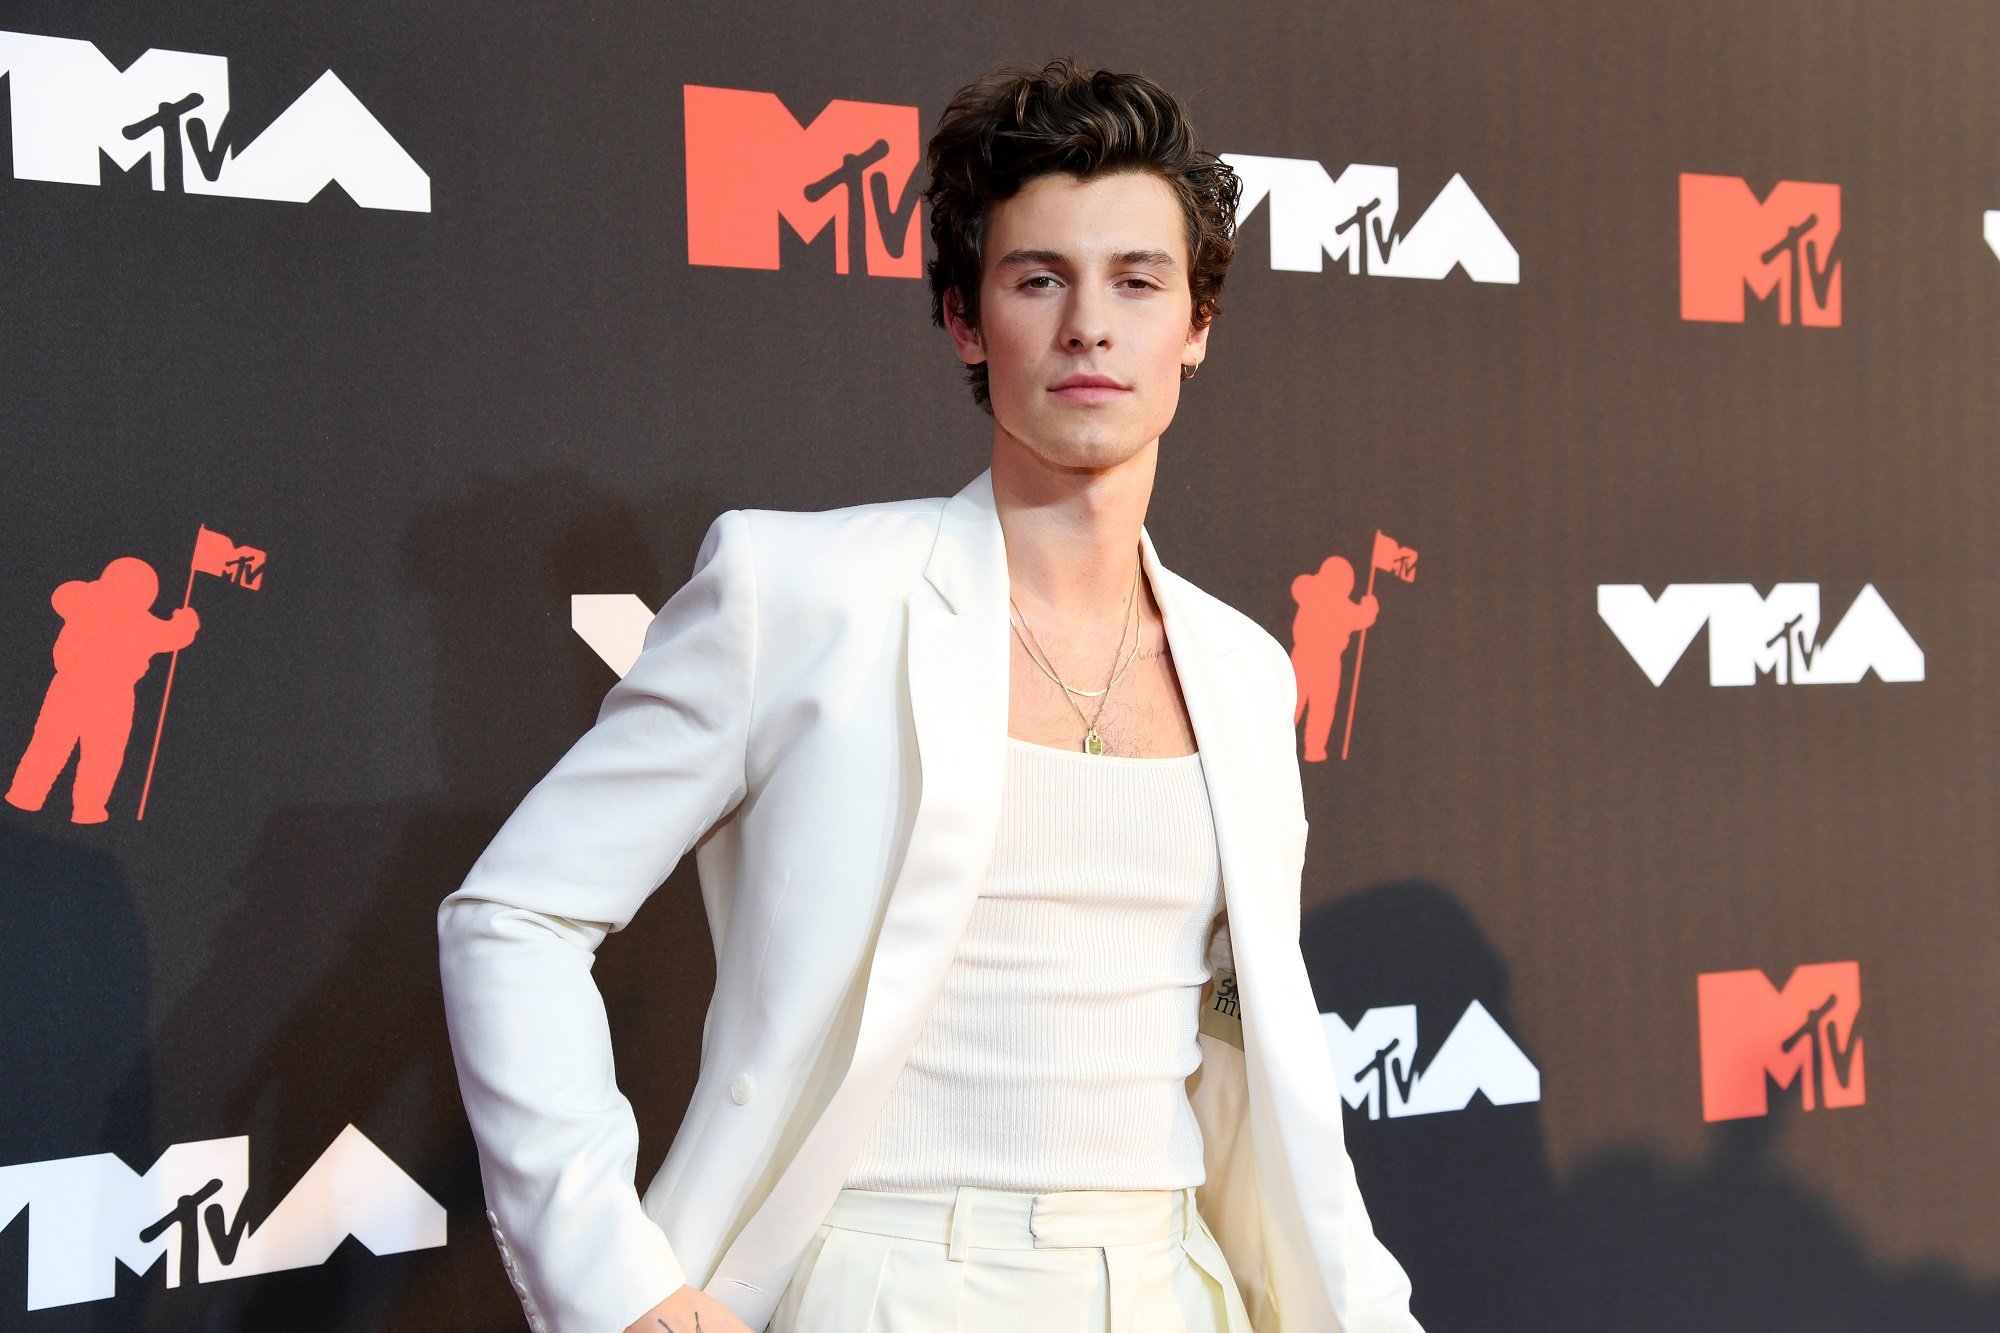 Shawn Mendes wears a white outfit in front of a backdrop at the 2021 MTV Video Music Awards